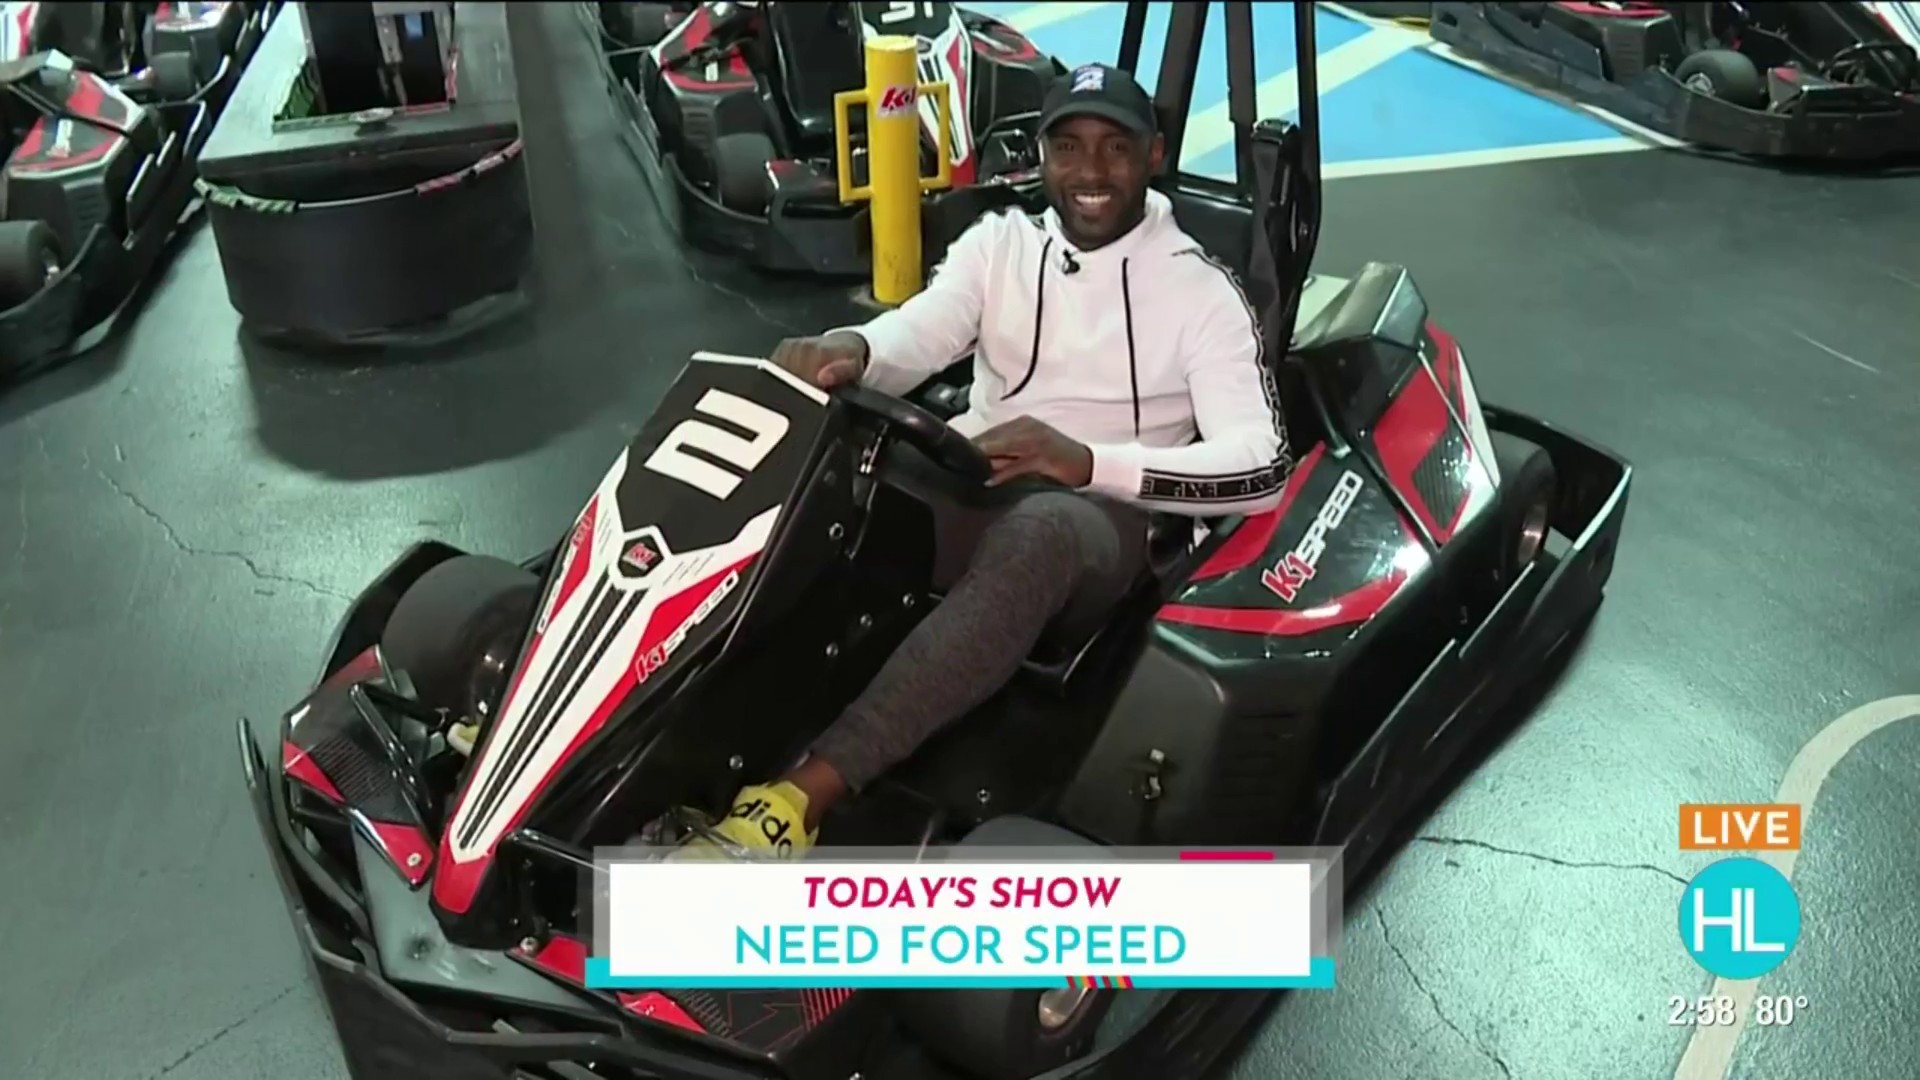 Need for speed at K1 Speed | HOUSTON LIFE | KPRC 2